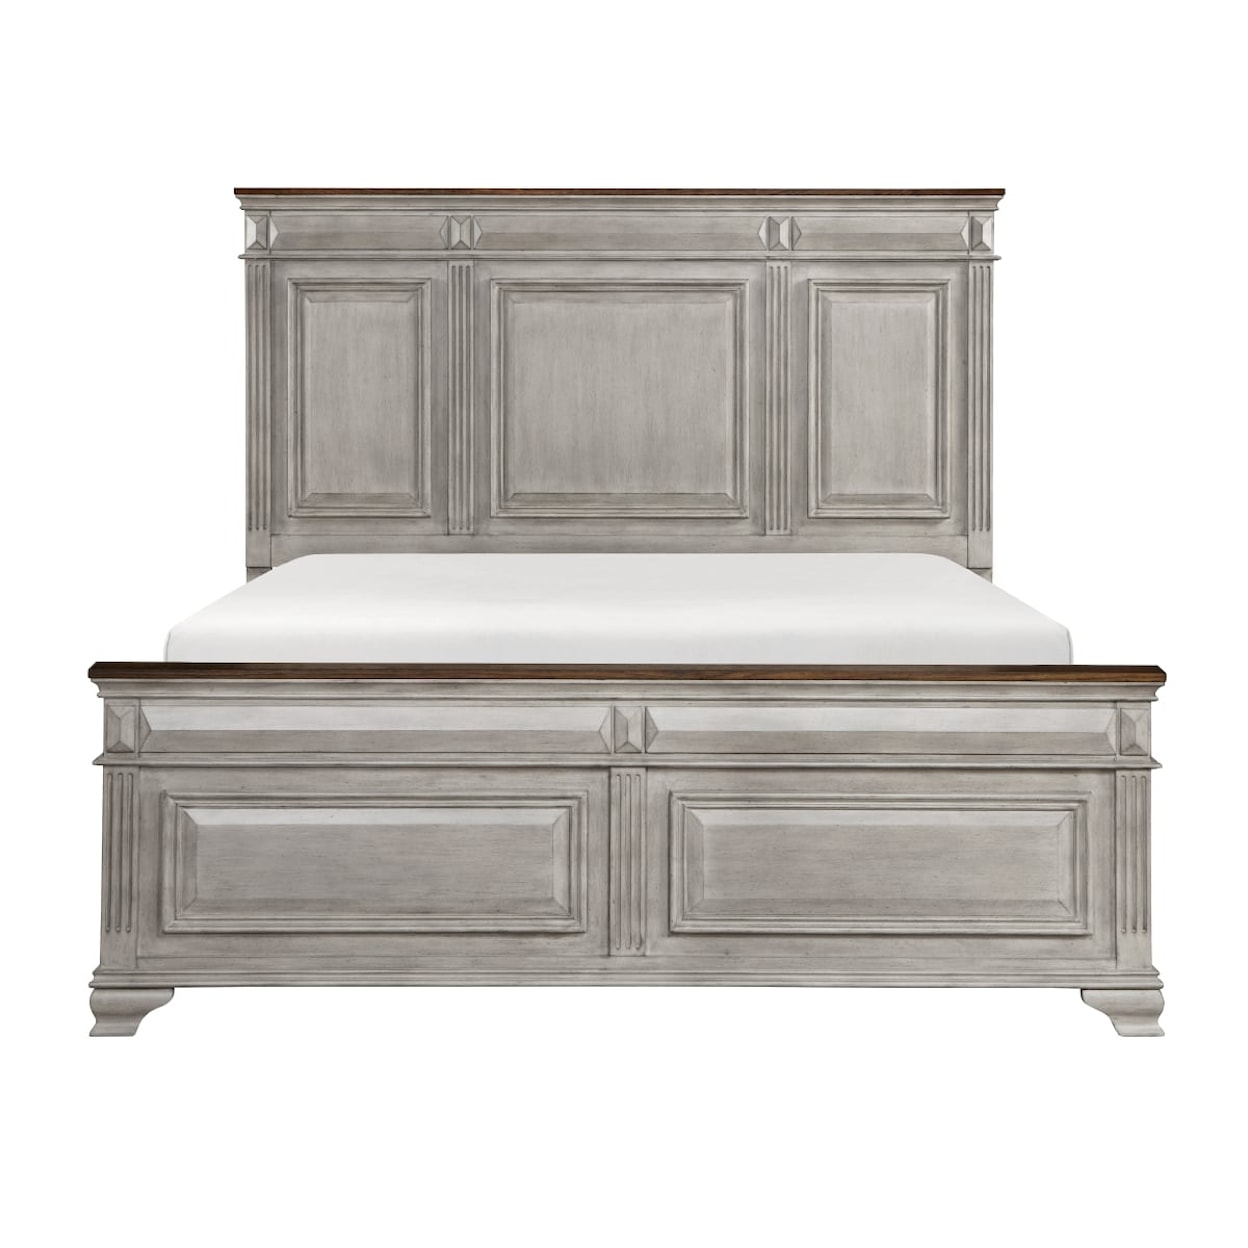 Homelegance Marquette Queen Bed